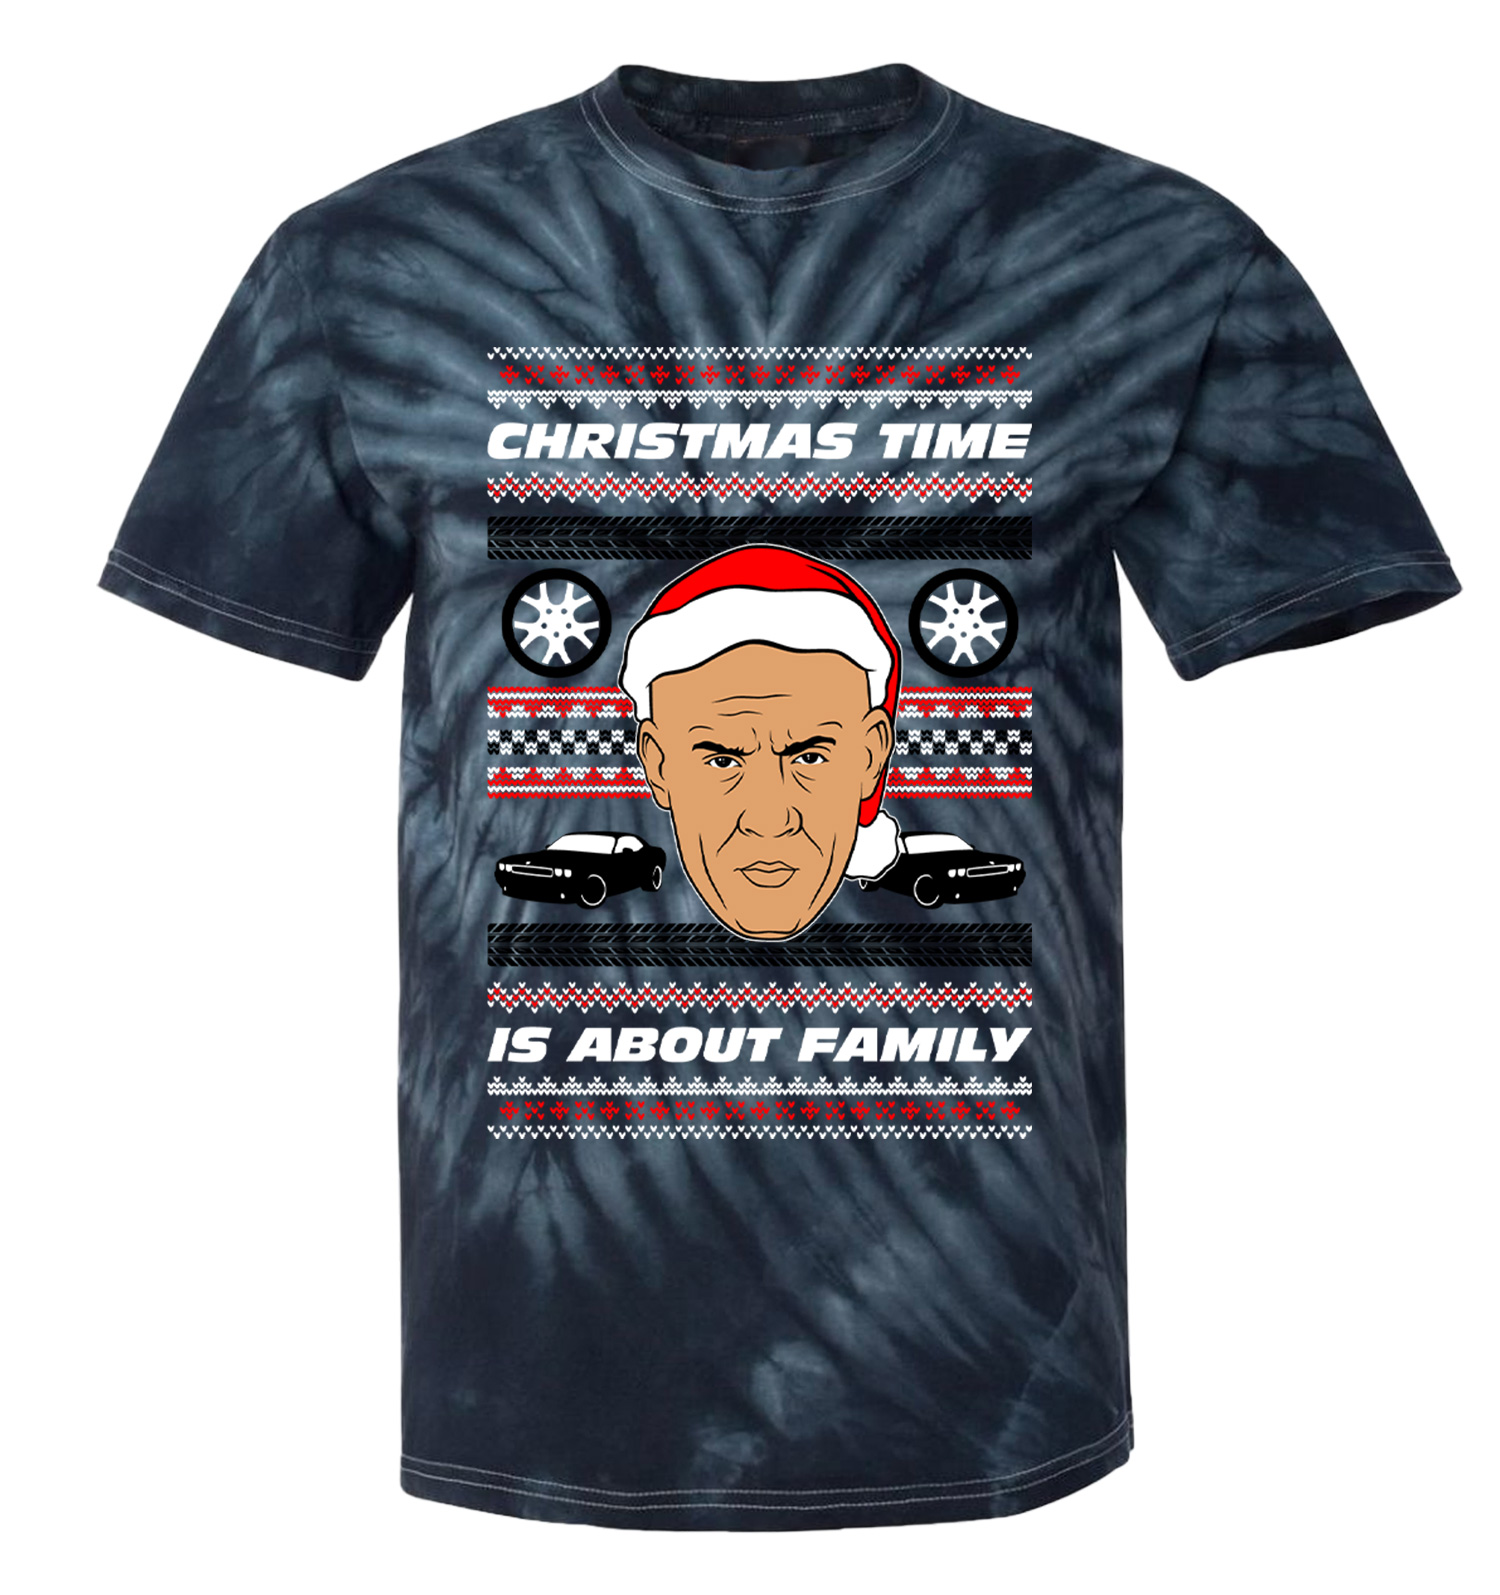 Christmas Time Is About Family - T-shirt Furious Men\'s eBay Toretto | Dom